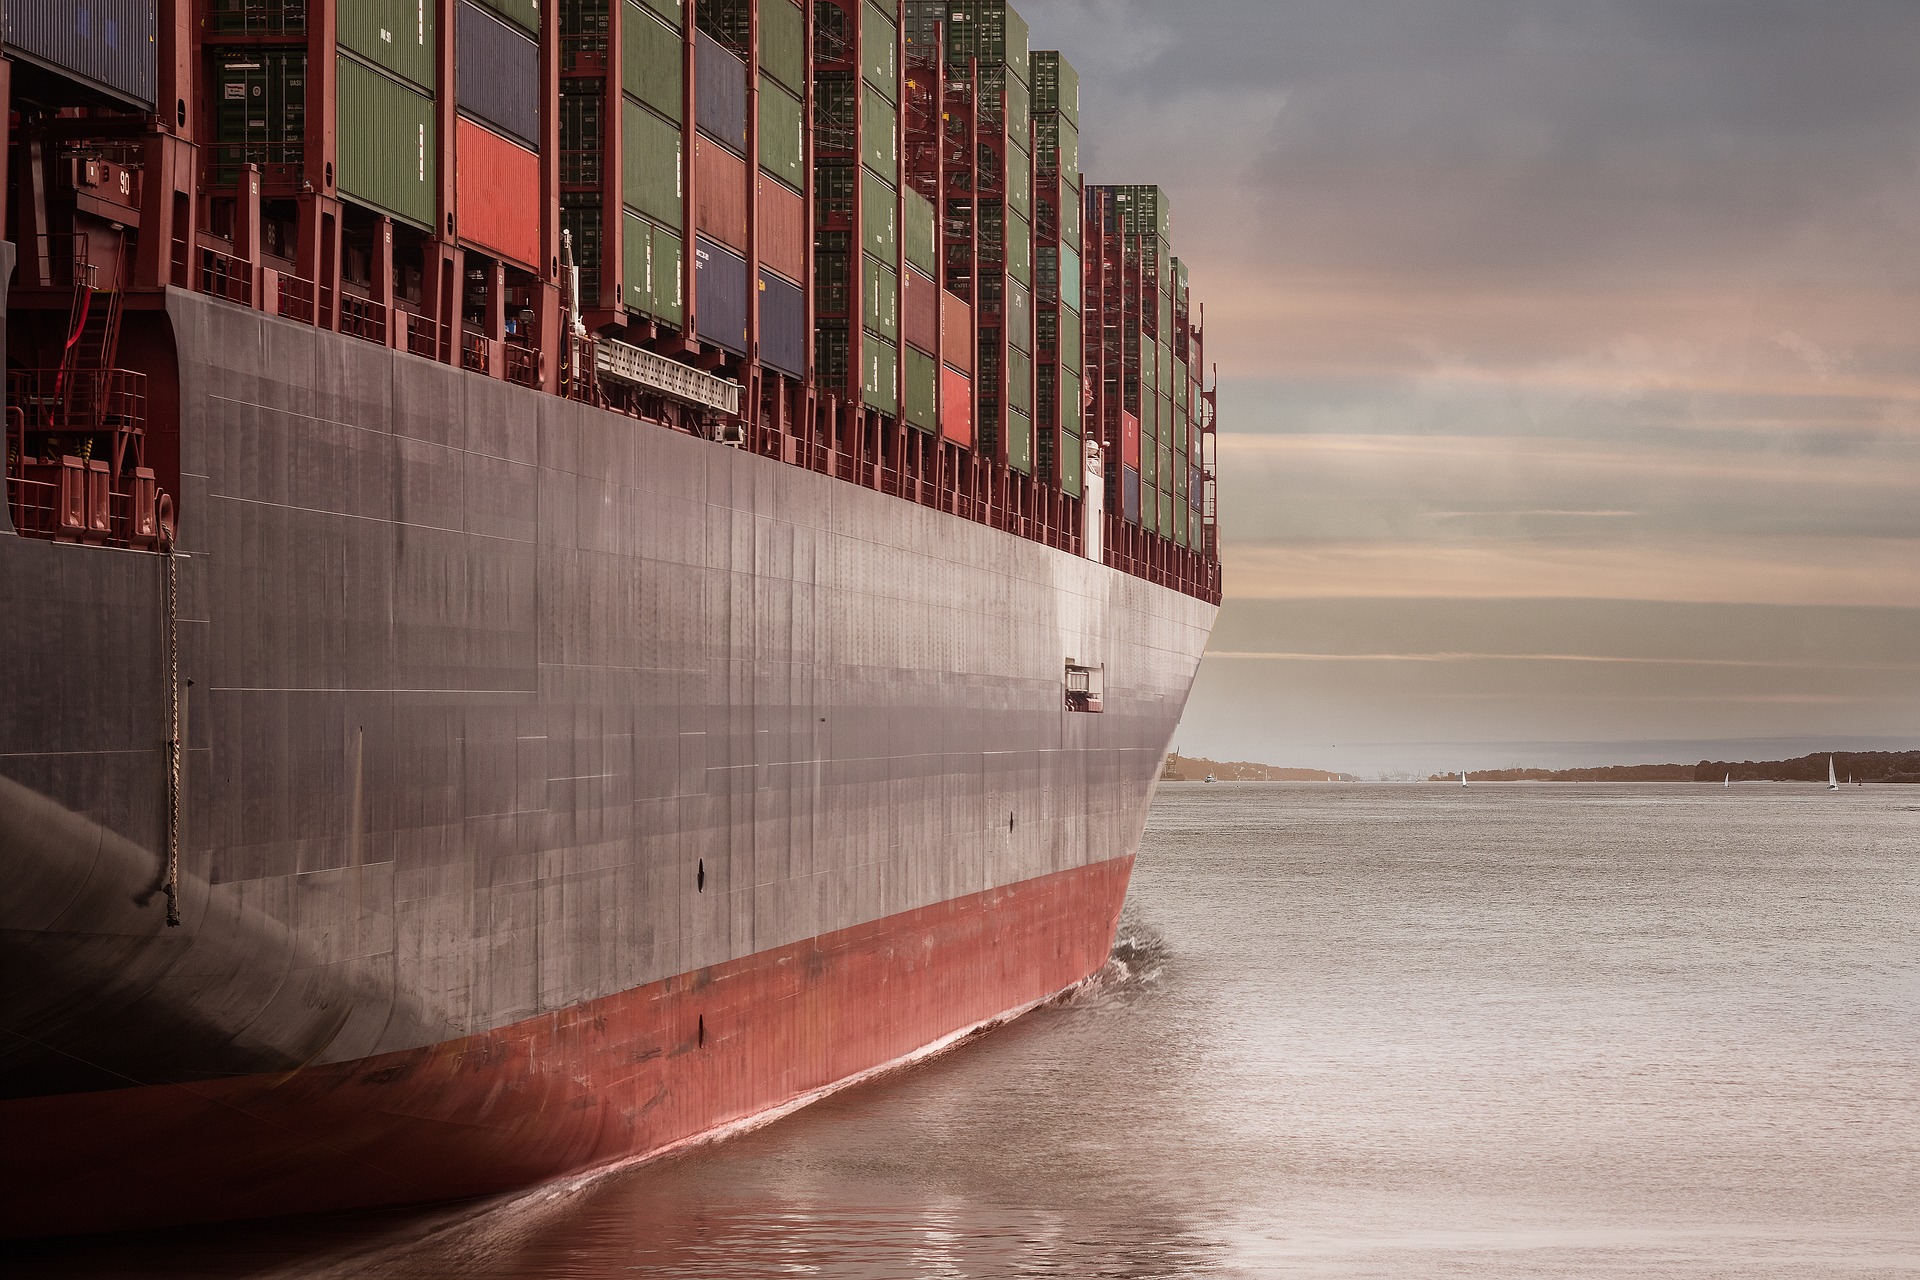 Dozens of container ships have been waiting to unload their goods in American ports / Alexander Kliem / Pixabay